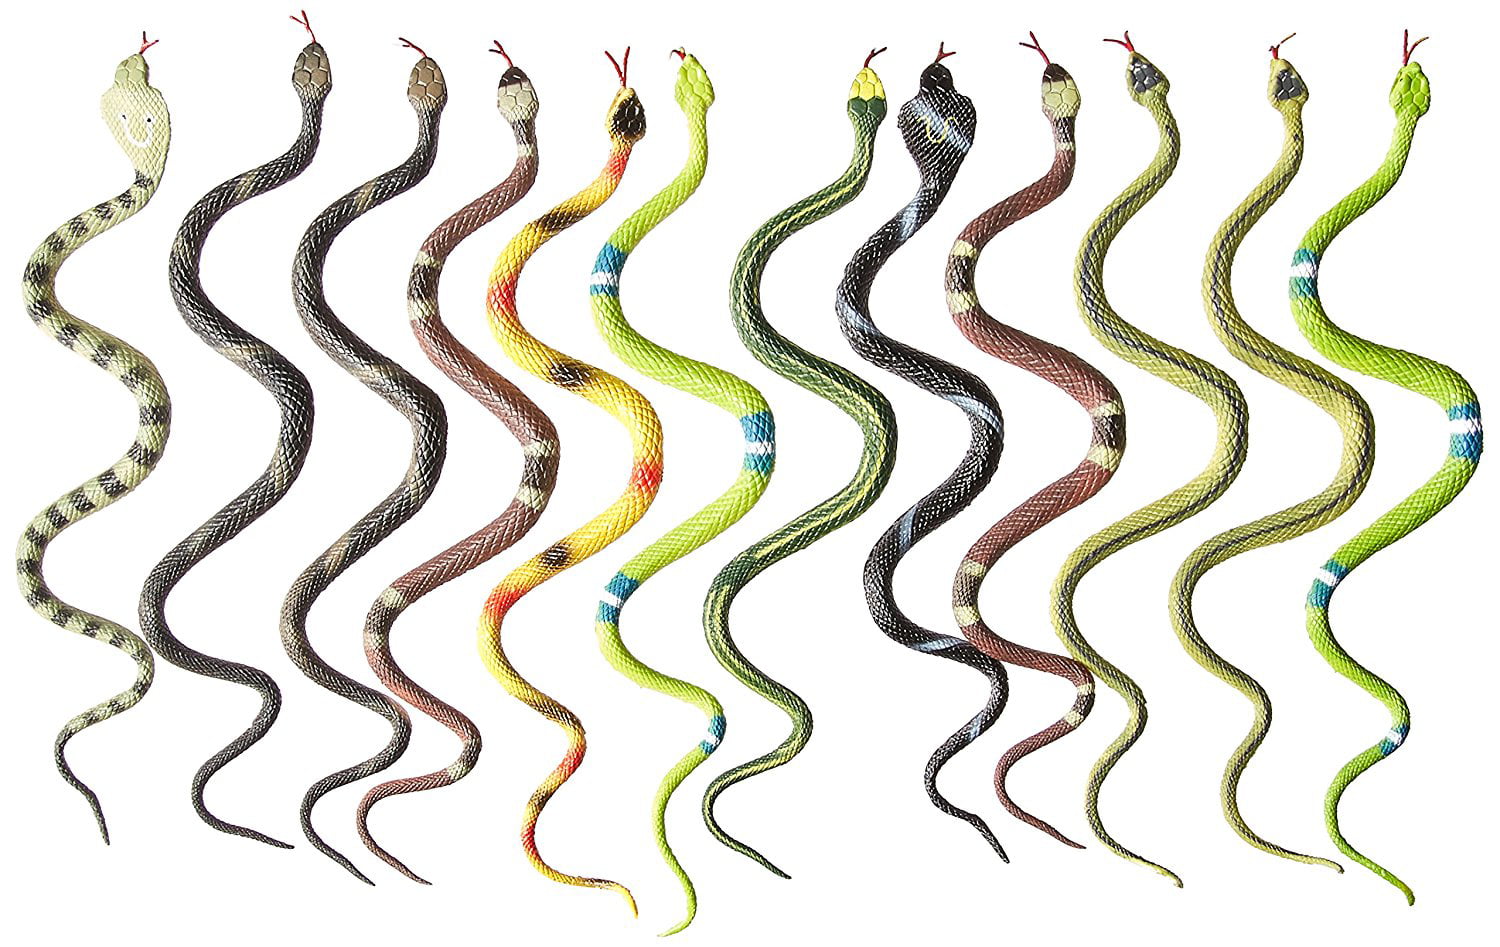 125 NEW RAIN FOREST RUBBER SNAKES KIDS TOY ZOO  REPTILE 6" JUNGLE SNAKE 